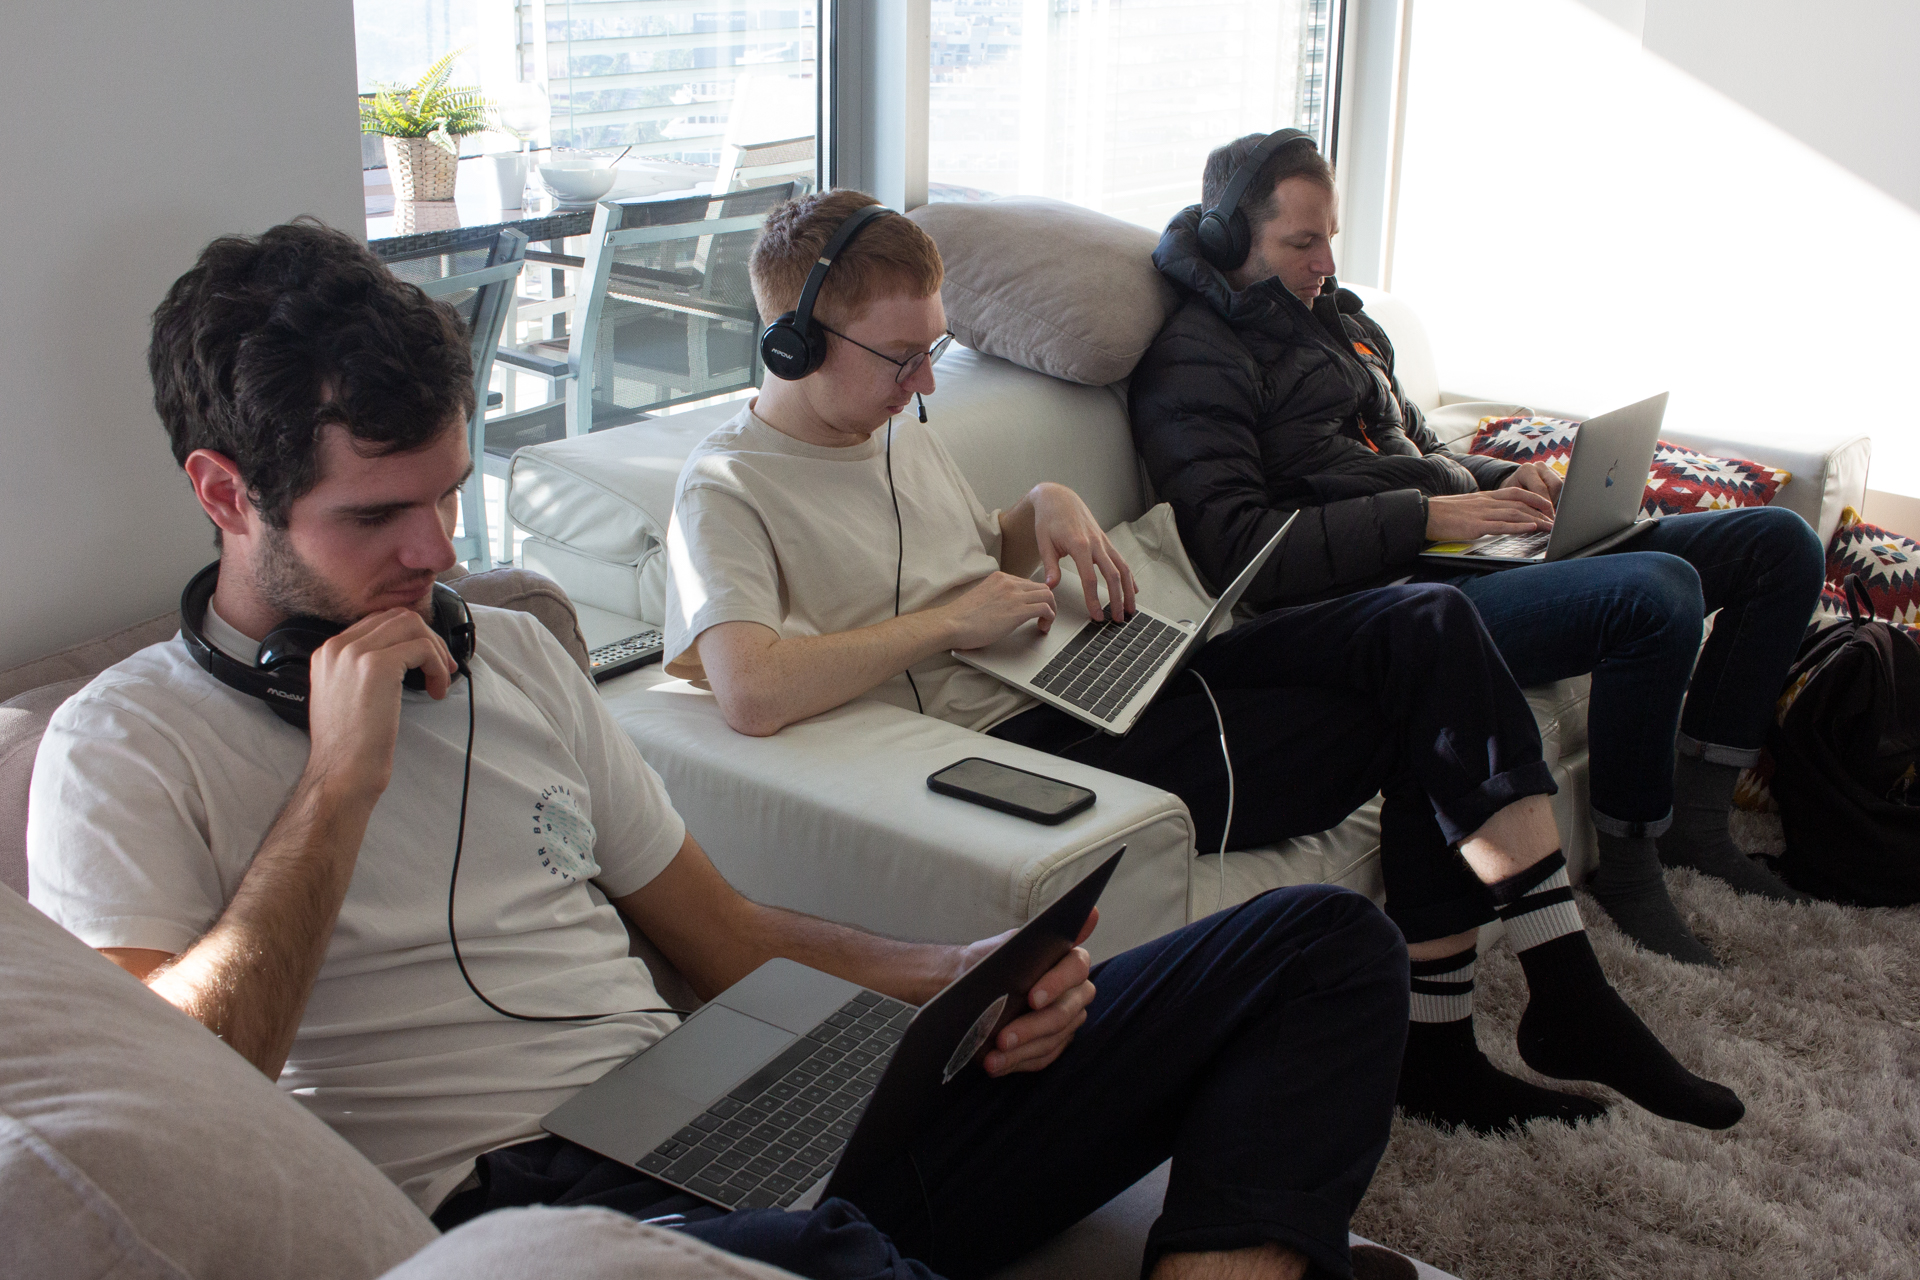 A team of coders work on laptops on a sofa in an apartment.